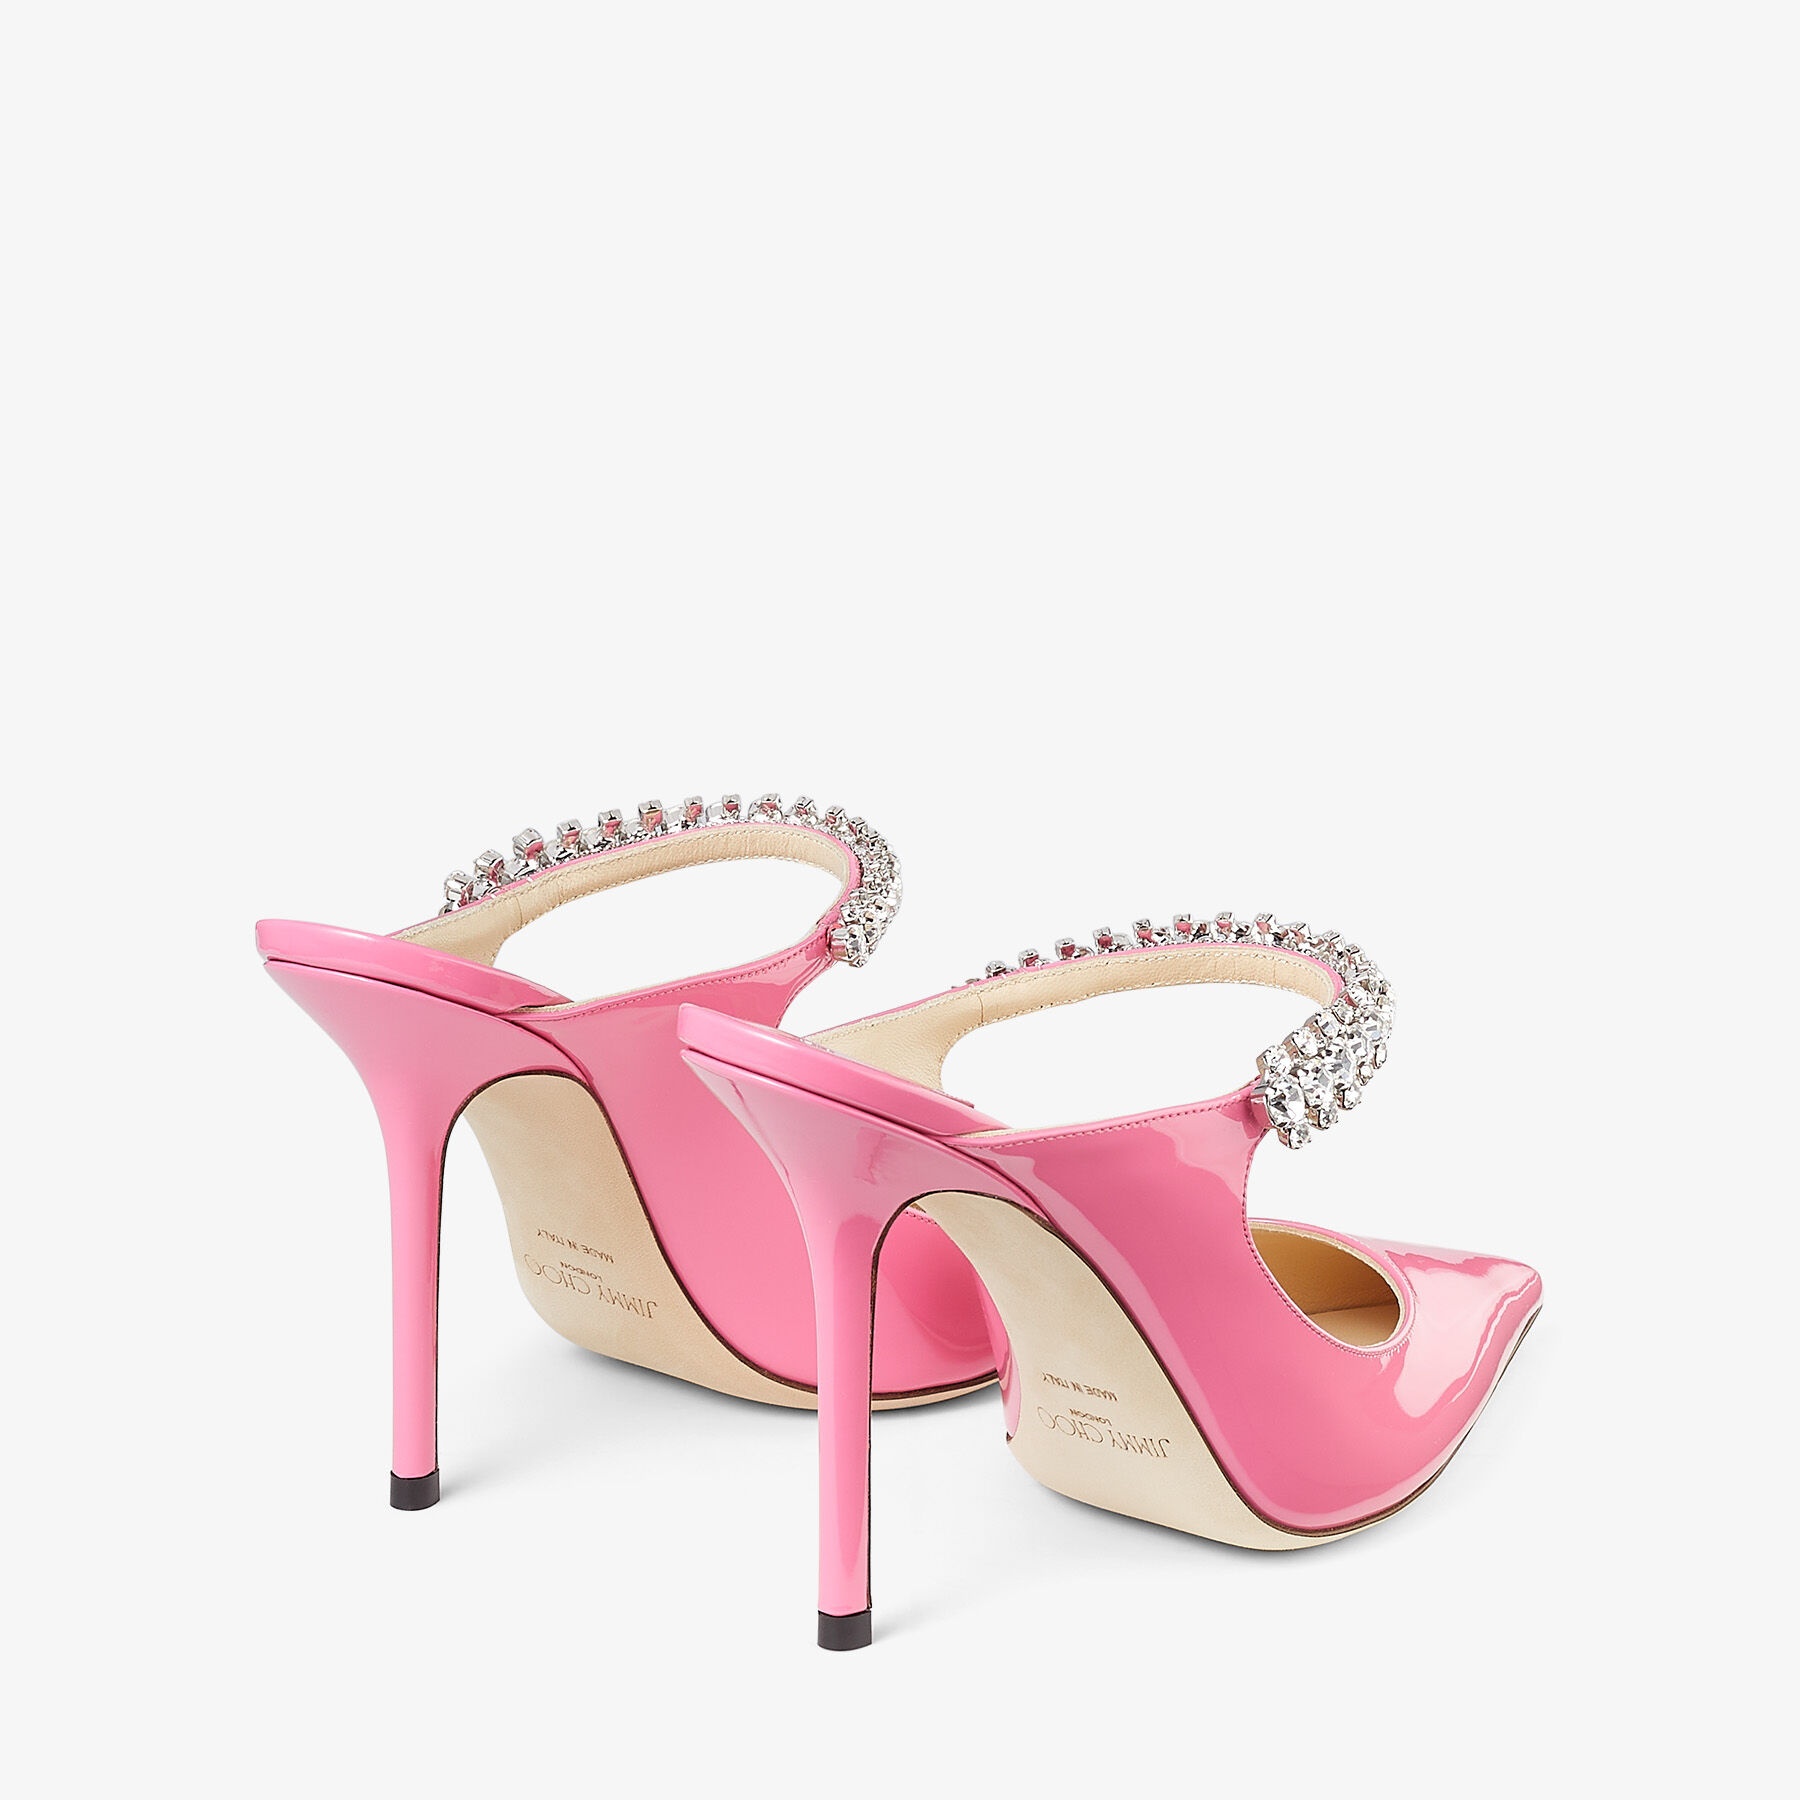 Bing 100
Candy Pink Patent Leather Pumps with Crystal Strap - 5